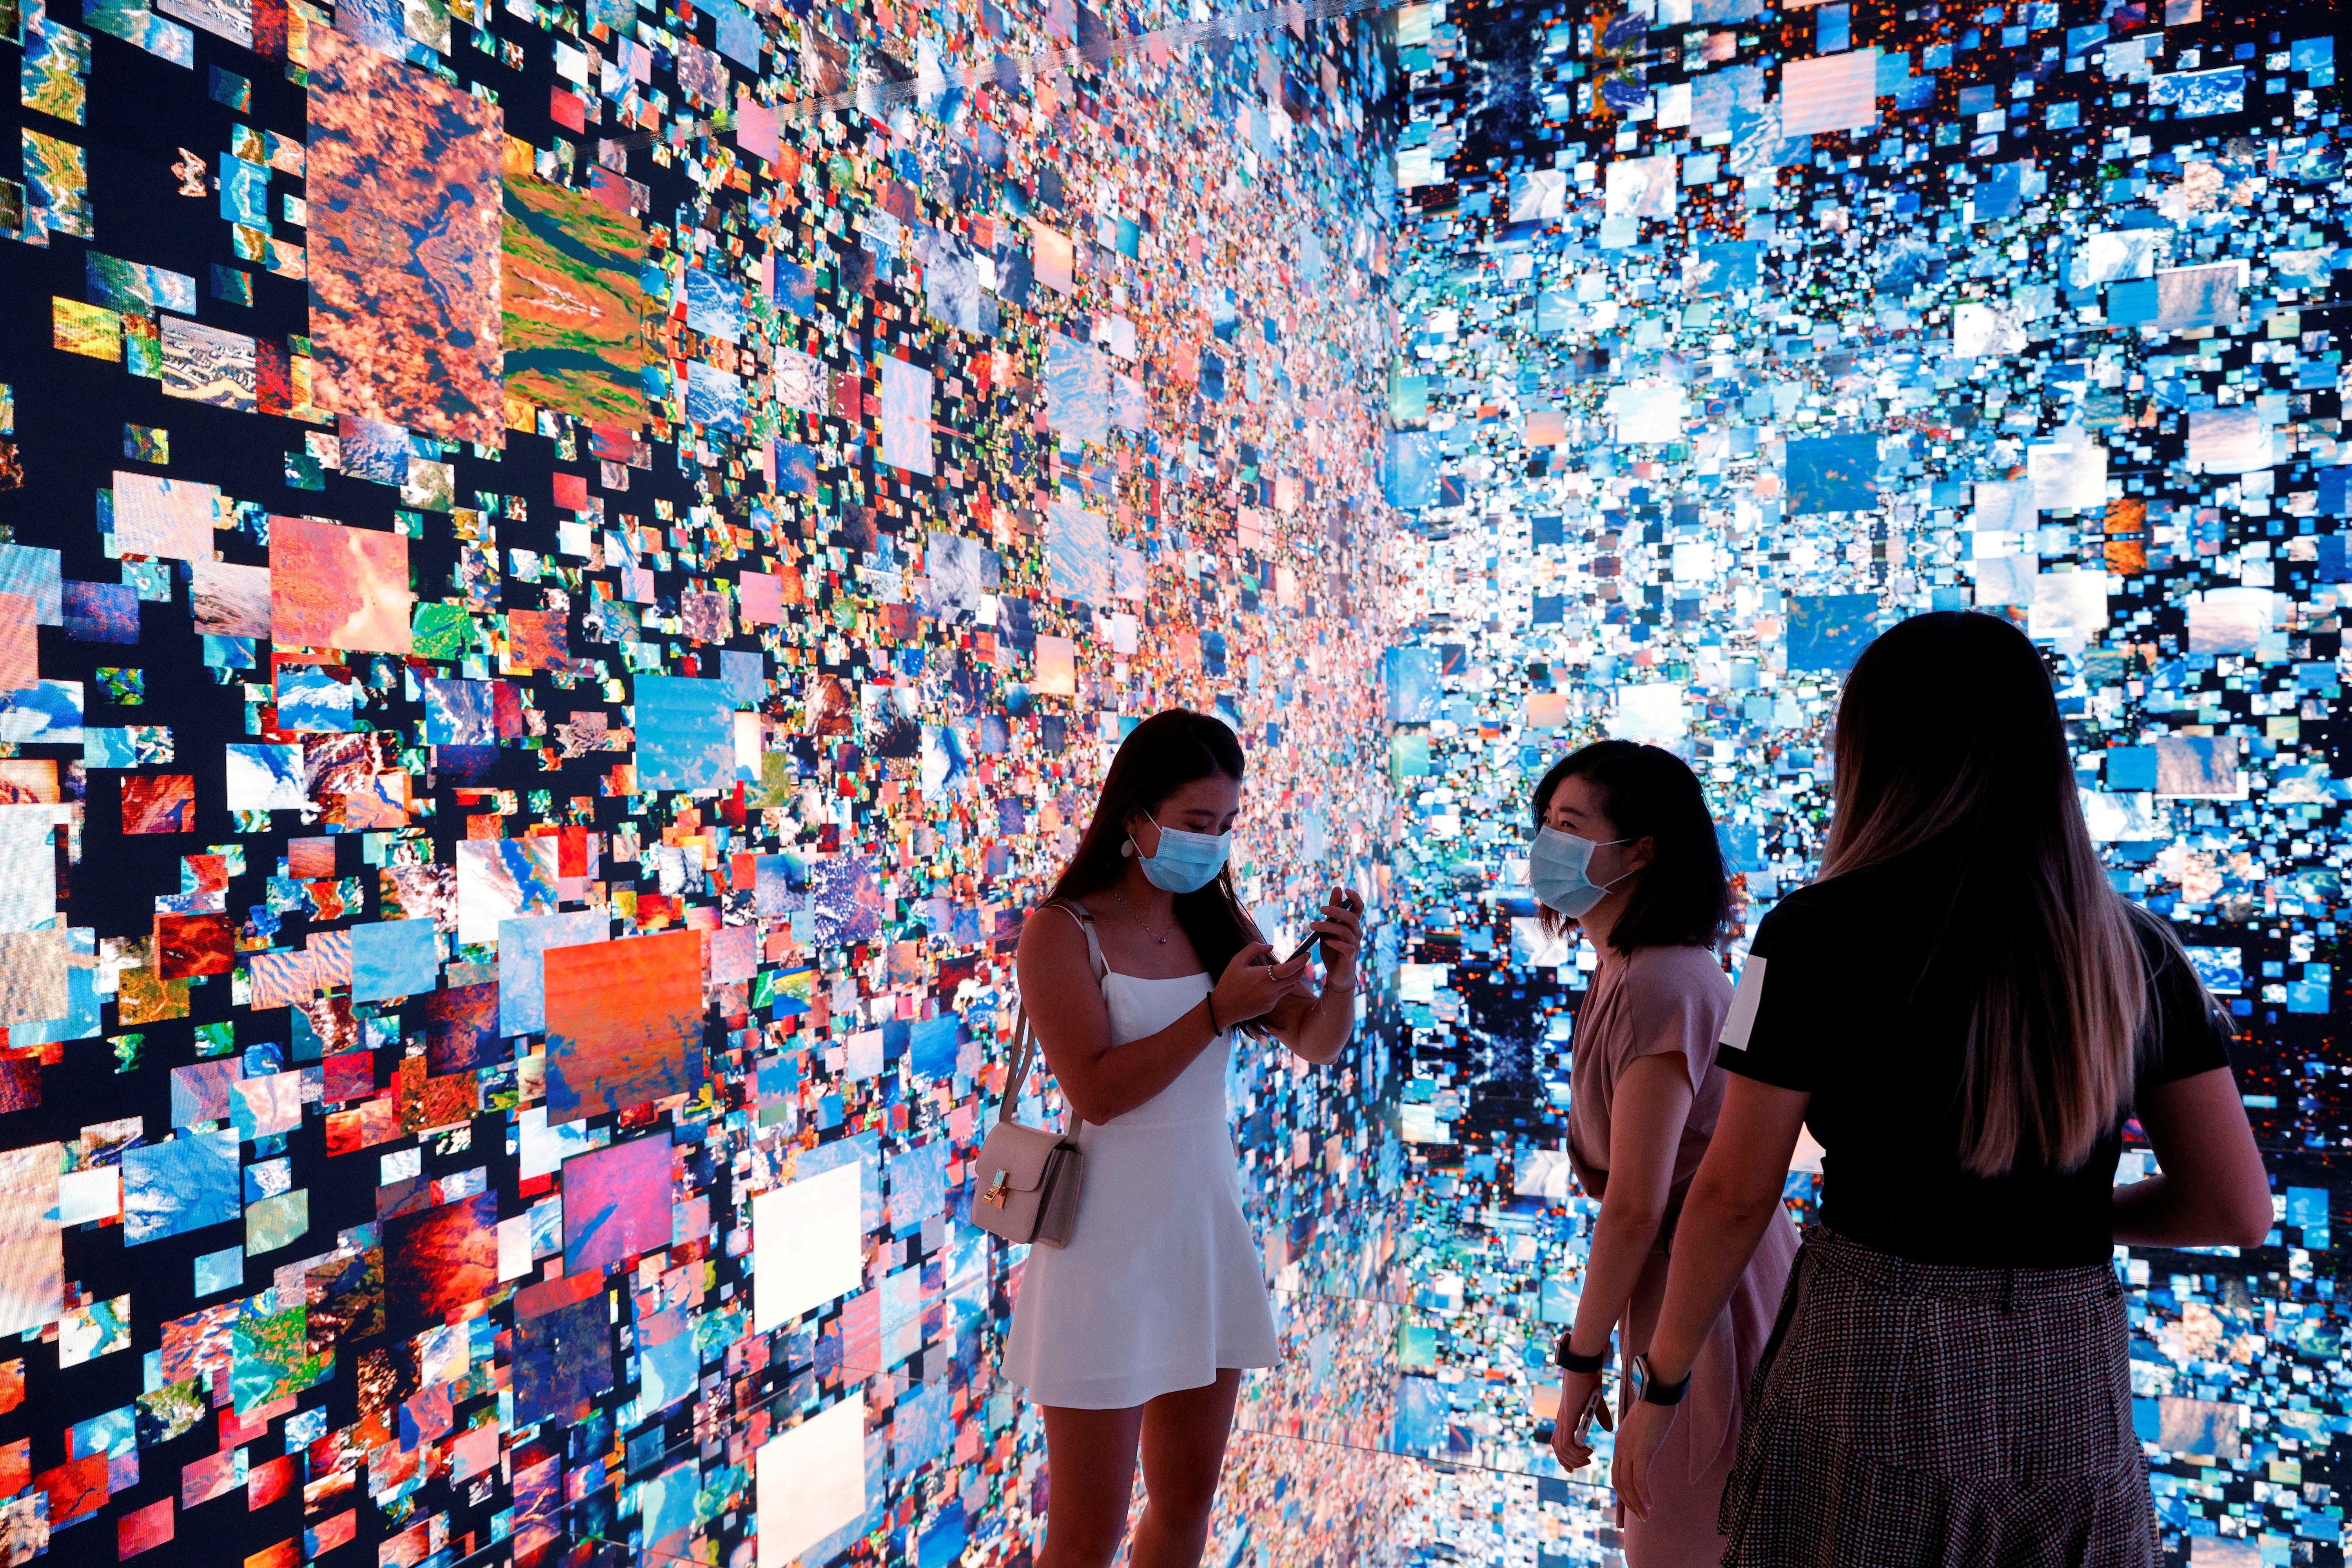 
FILE PHOTO: Visitors are pictured in front of an immersive art installation titled 